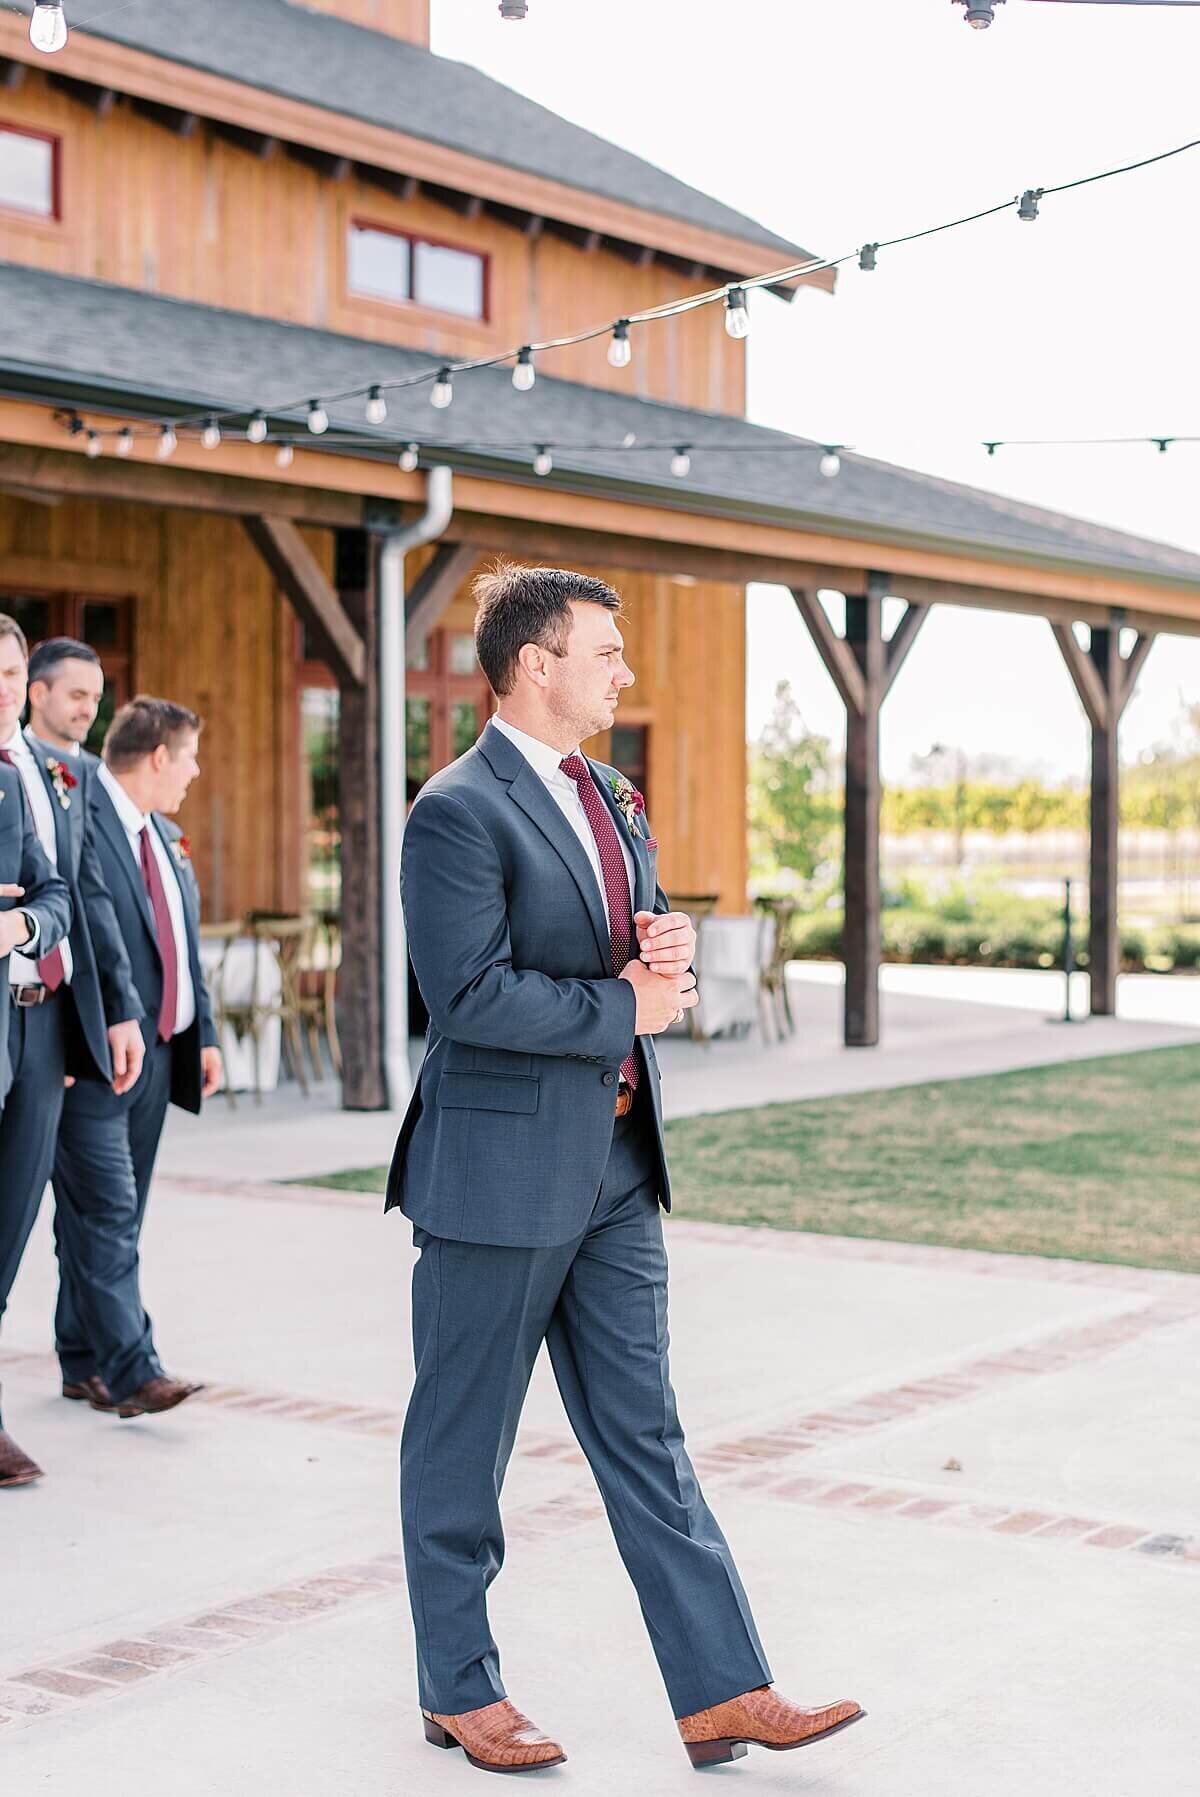 Bridal Party Portraits at the Weinberg at Wixon Valley in Bryan Texas photographed by Alicia Yarrish Photography